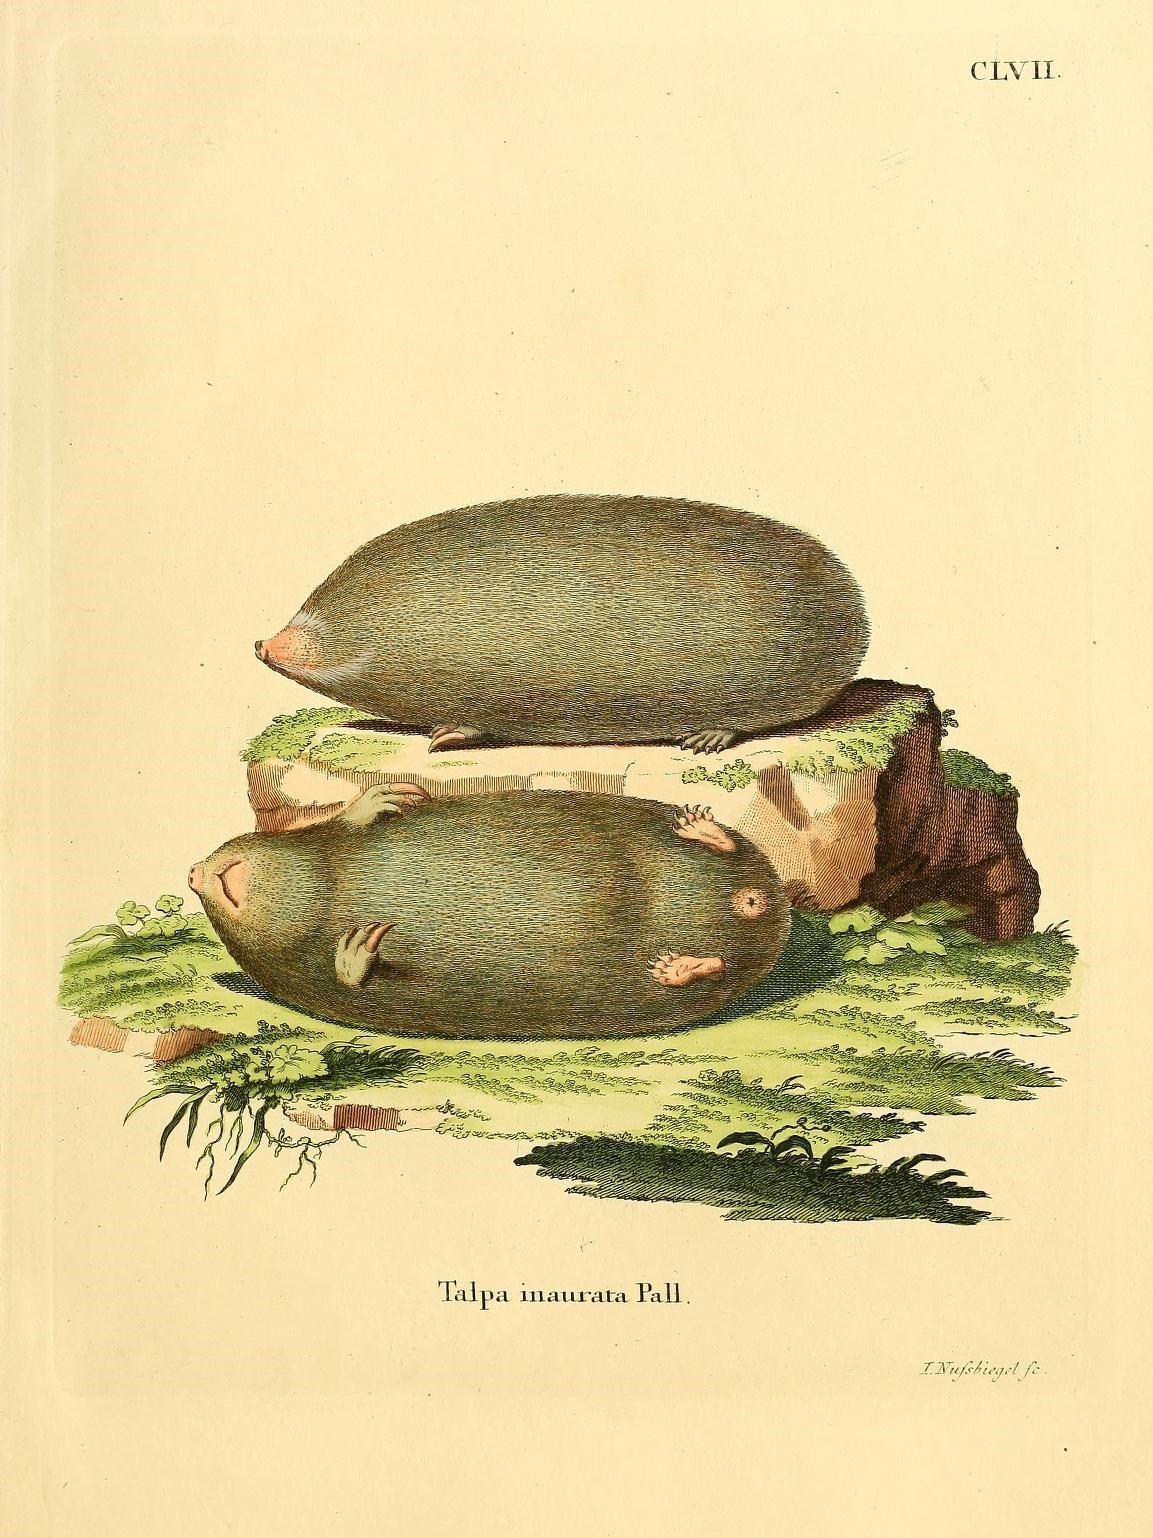 an antique illustration of two turtles on some grass